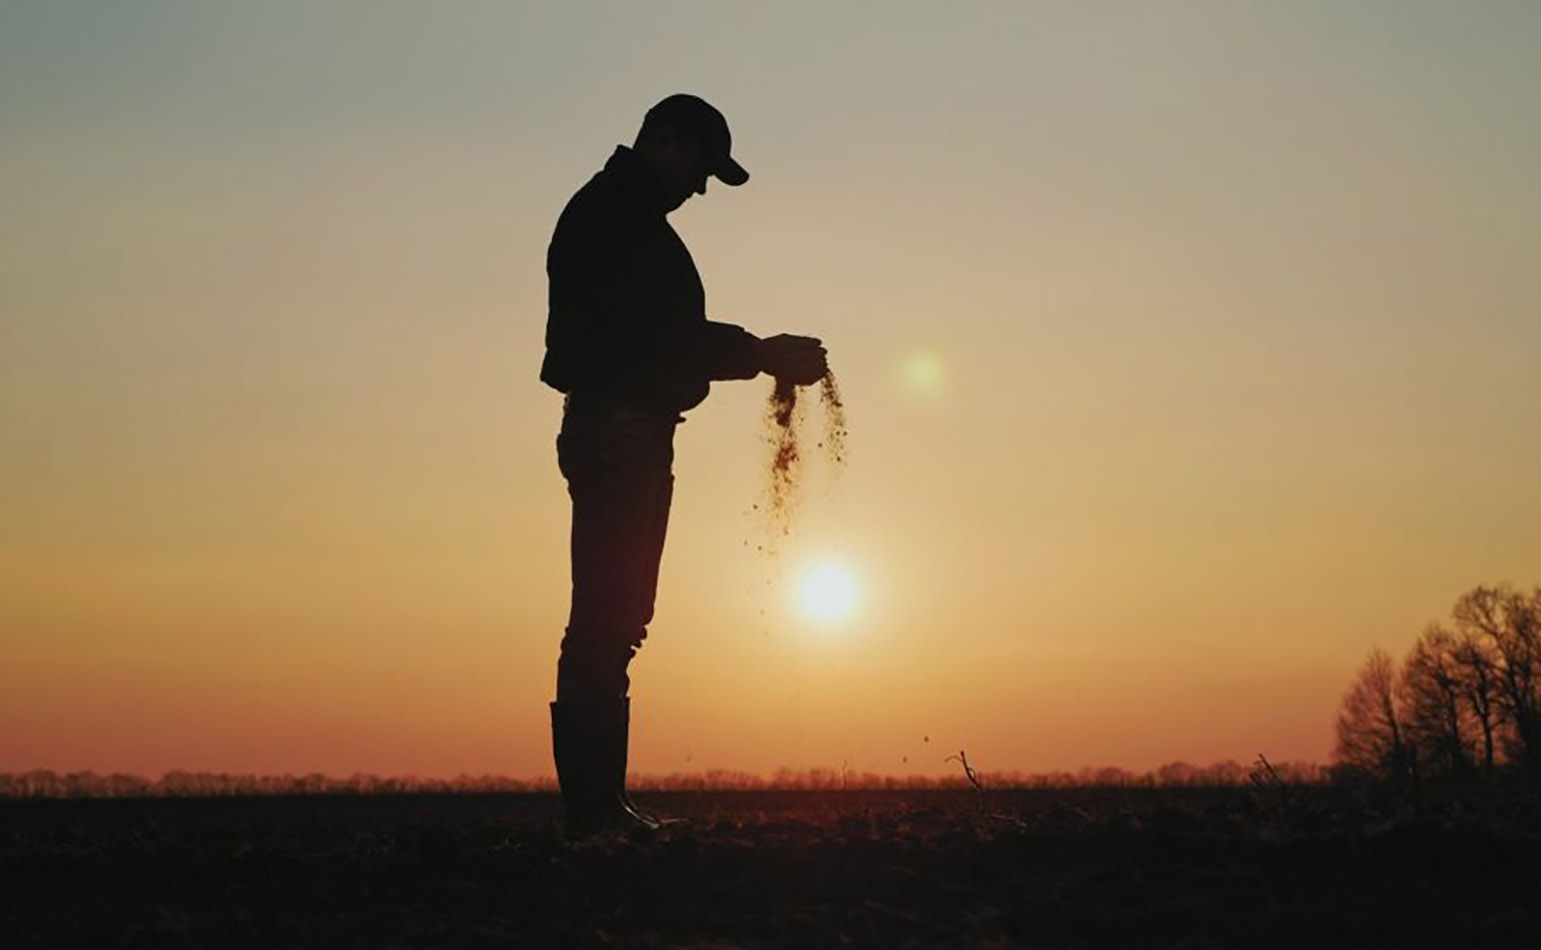 Silhouette of farmer standing in a field at sunset, holding soil in hands.